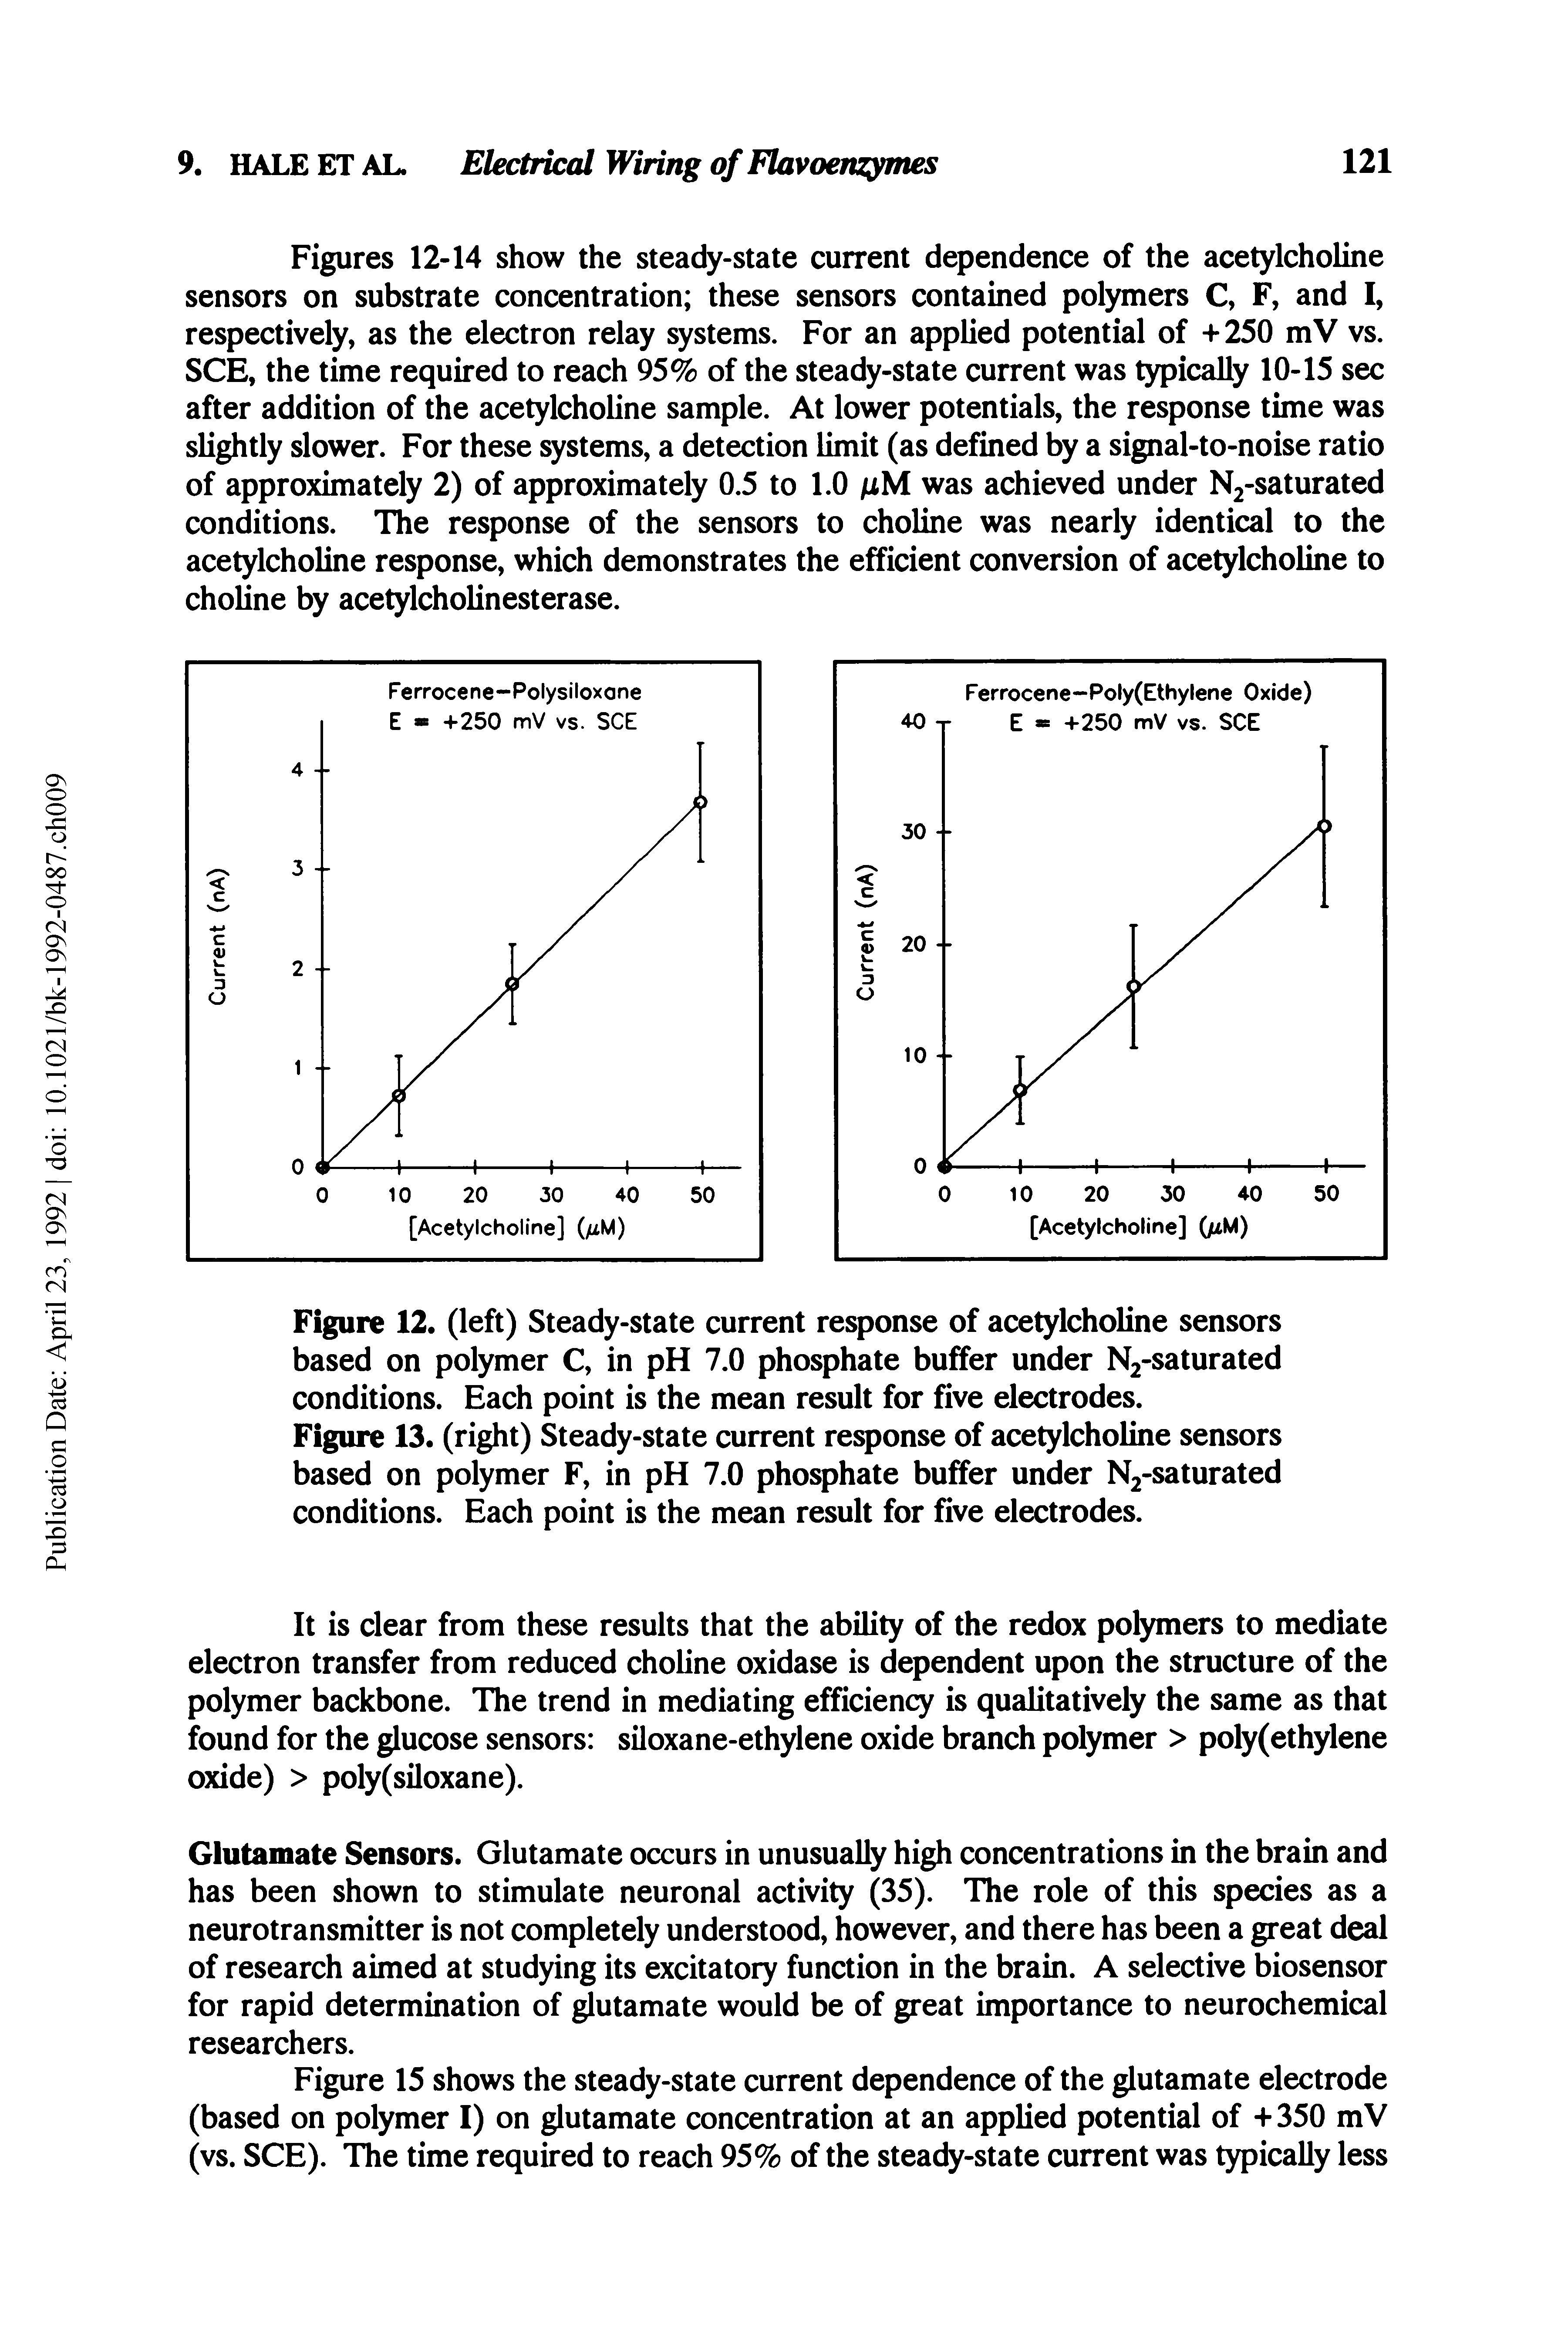 Figures 12-14 show the steady-state current dependence of the acetylcholine sensors on substrate concentration these sensors contained polymers C, F, and I, respectively, as the electron relay systems. For an applied potential of +250 mV vs. SCE, the time required to reach 95% of the steady-state current was typically 10-15 sec after addition of the acetylcholine sample. At lower potentials, the response time was slightly slower. For these systems, a detection limit (as defined by a signal-to-noise ratio of approximately 2) of approximately 0.5 to 1.0 /xM was achieved under N2-saturated conditions. The response of the sensors to choline was nearly identical to the acetylcholine response, which demonstrates the efficient conversion of acetylcholine to choline by acetylcholinesterase.